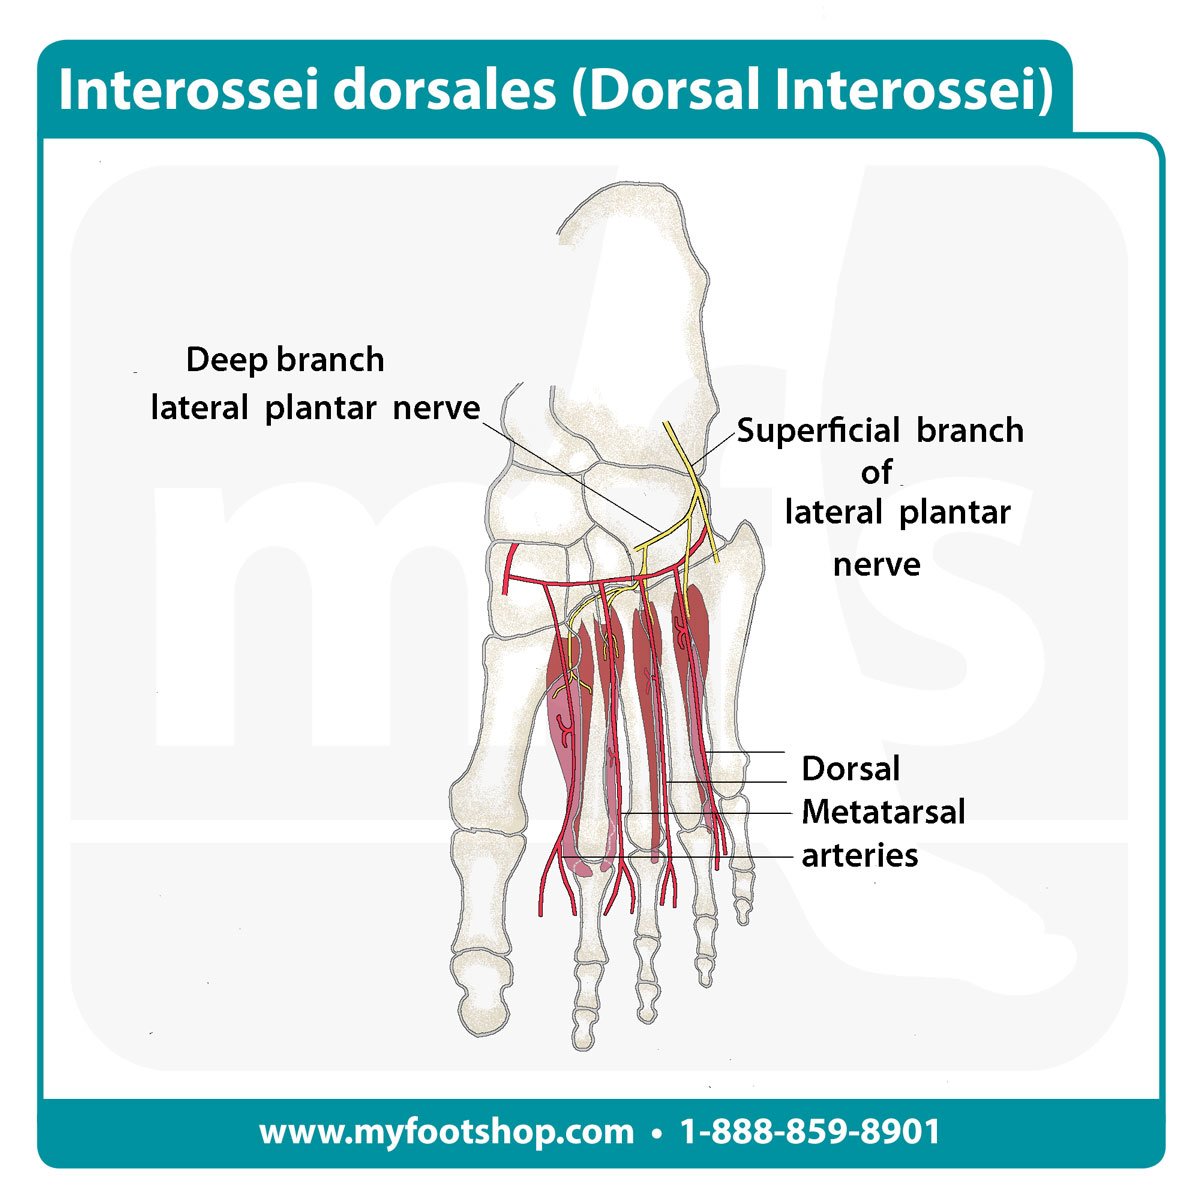 Image of the dorsal interossei muscles of the foot